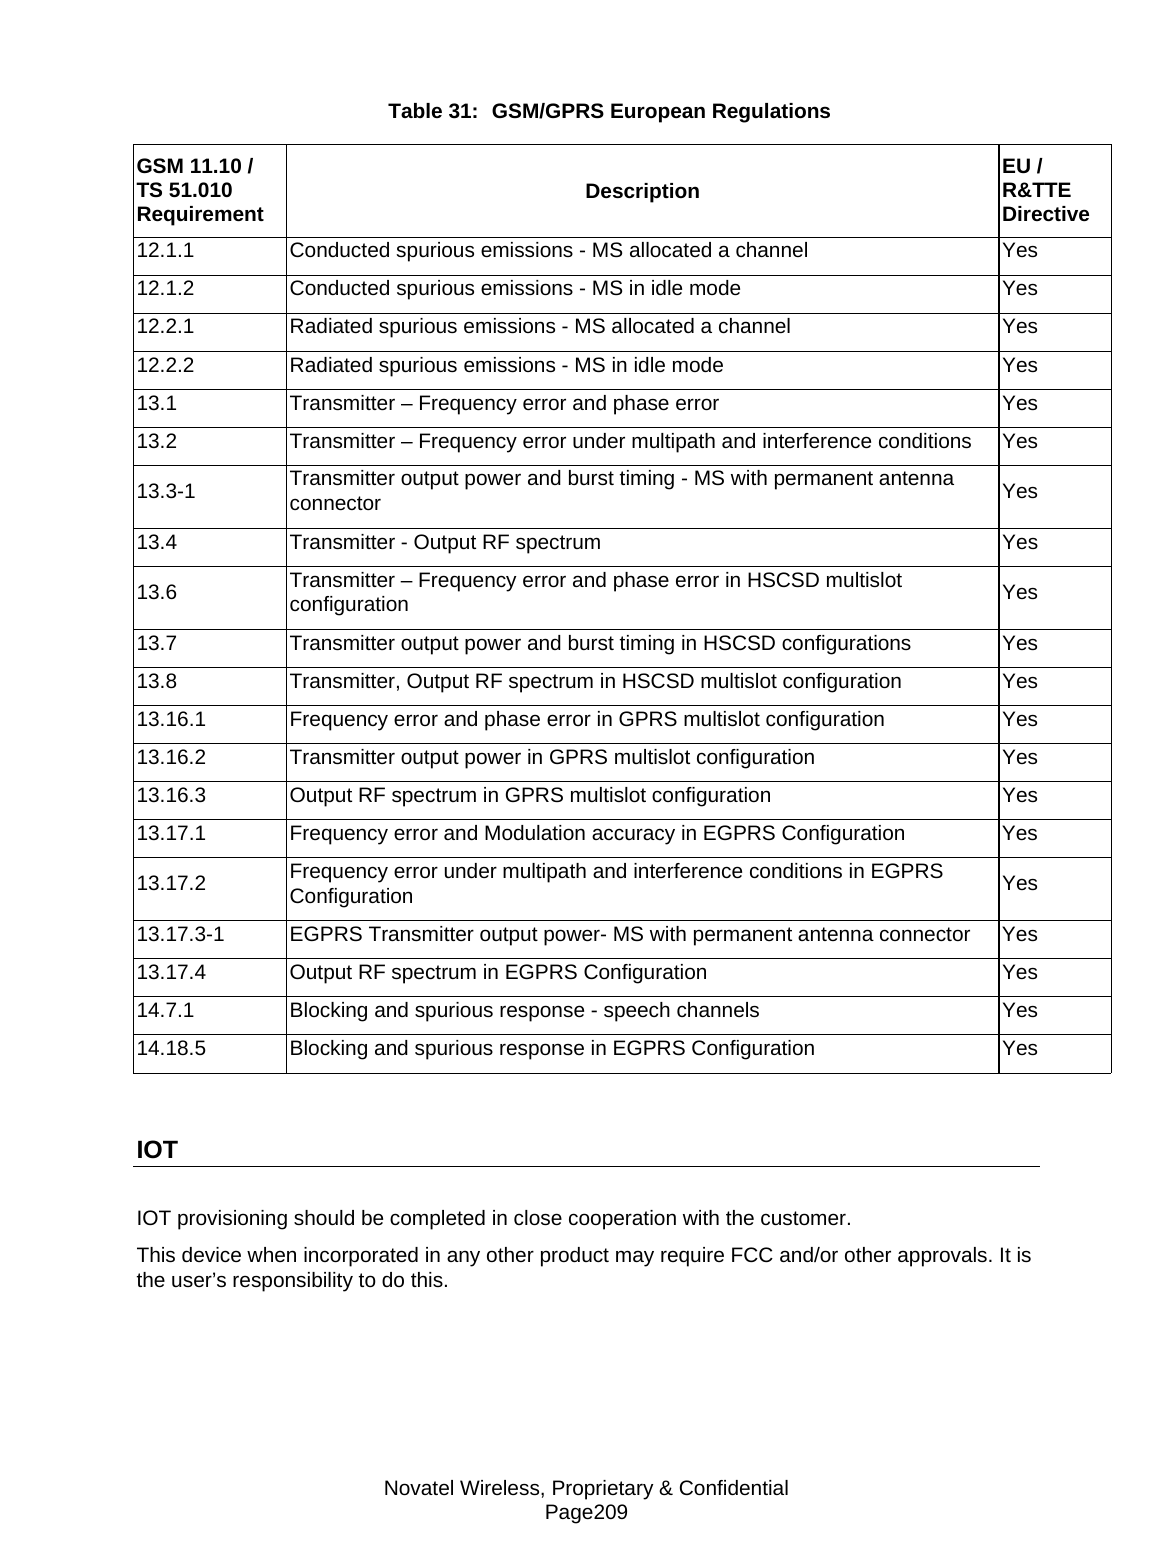 Novatel Wireless, Proprietary &amp; Confidential Page209 Table 31:  GSM/GPRS European Regulations GSM 11.10 / TS 51.010 Requirement  Description  EU / R&amp;TTE Directive 12.1.1  Conducted spurious emissions - MS allocated a channel  Yes 12.1.2  Conducted spurious emissions - MS in idle mode  Yes 12.2.1  Radiated spurious emissions - MS allocated a channel  Yes 12.2.2  Radiated spurious emissions - MS in idle mode  Yes 13.1  Transmitter – Frequency error and phase error  Yes 13.2  Transmitter – Frequency error under multipath and interference conditions  Yes 13.3-1  Transmitter output power and burst timing - MS with permanent antenna connector  Yes 13.4  Transmitter - Output RF spectrum  Yes 13.6  Transmitter – Frequency error and phase error in HSCSD multislot configuration  Yes 13.7  Transmitter output power and burst timing in HSCSD configurations  Yes 13.8  Transmitter, Output RF spectrum in HSCSD multislot configuration  Yes 13.16.1  Frequency error and phase error in GPRS multislot configuration  Yes 13.16.2  Transmitter output power in GPRS multislot configuration  Yes 13.16.3  Output RF spectrum in GPRS multislot configuration  Yes 13.17.1  Frequency error and Modulation accuracy in EGPRS Configuration  Yes 13.17.2  Frequency error under multipath and interference conditions in EGPRS Configuration  Yes 13.17.3-1  EGPRS Transmitter output power- MS with permanent antenna connector  Yes 13.17.4  Output RF spectrum in EGPRS Configuration  Yes 14.7.1  Blocking and spurious response - speech channels  Yes 14.18.5  Blocking and spurious response in EGPRS Configuration  Yes  IOT IOT provisioning should be completed in close cooperation with the customer.  This device when incorporated in any other product may require FCC and/or other approvals. It is the user’s responsibility to do this. 